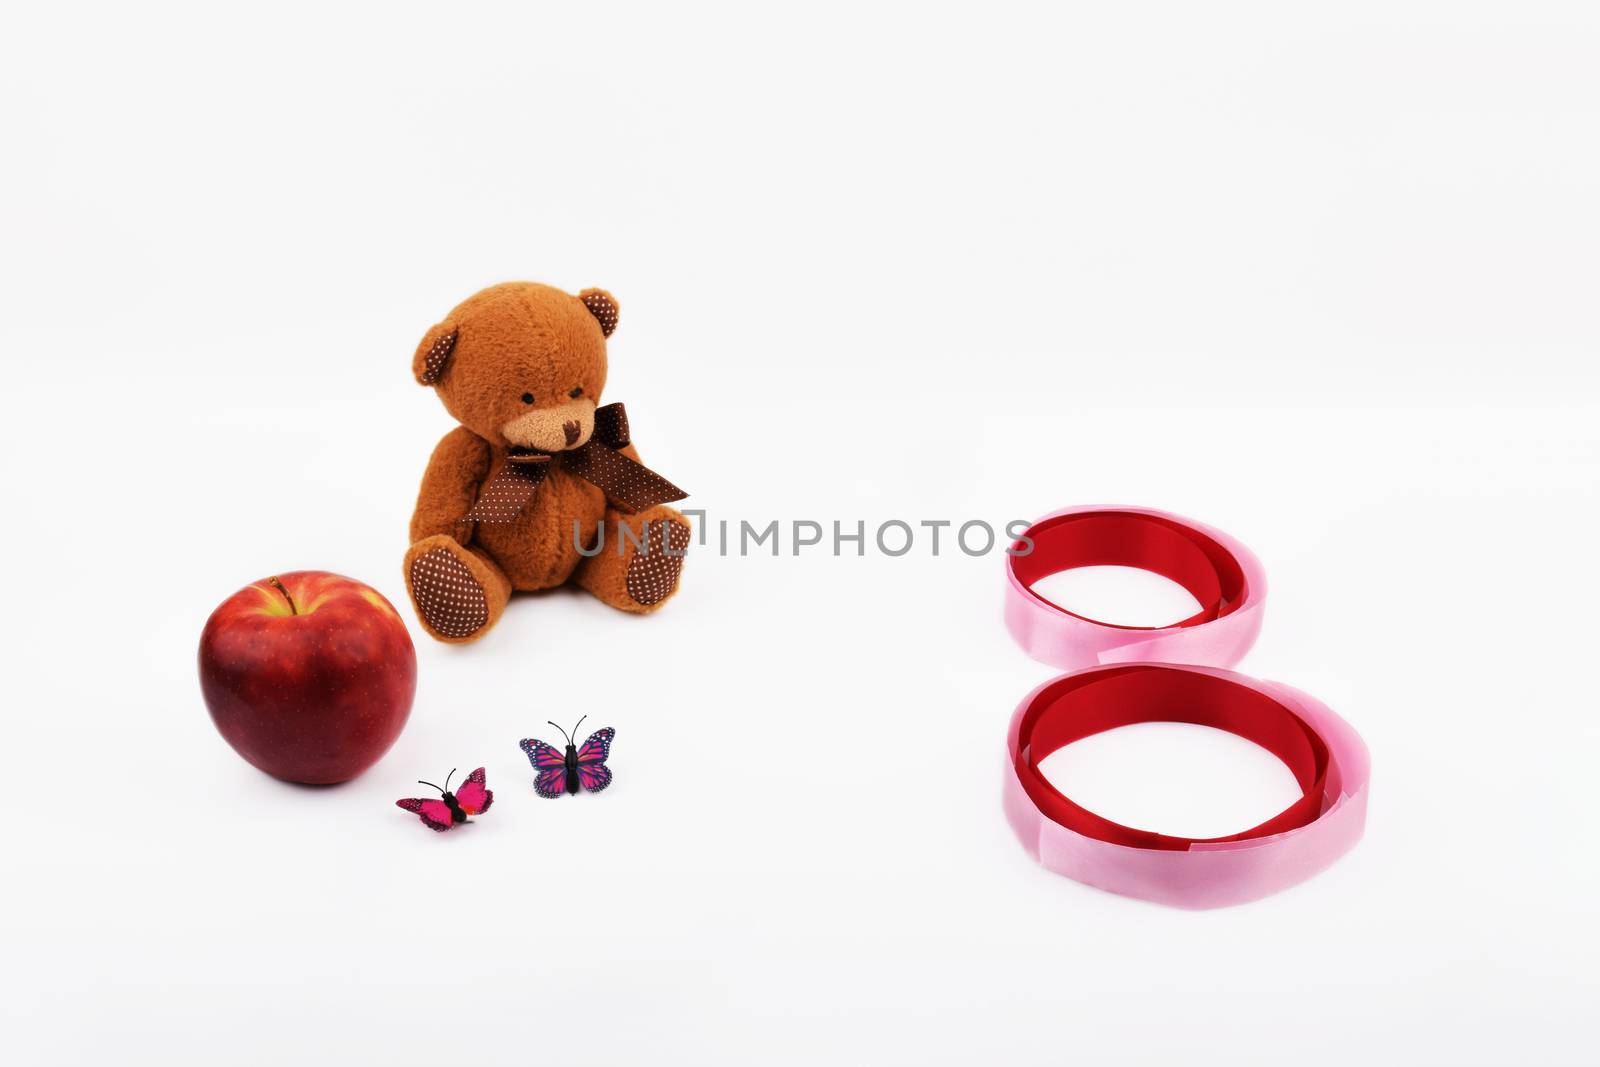 Mock up objects on the white background, topic - International Women's Day. Front view